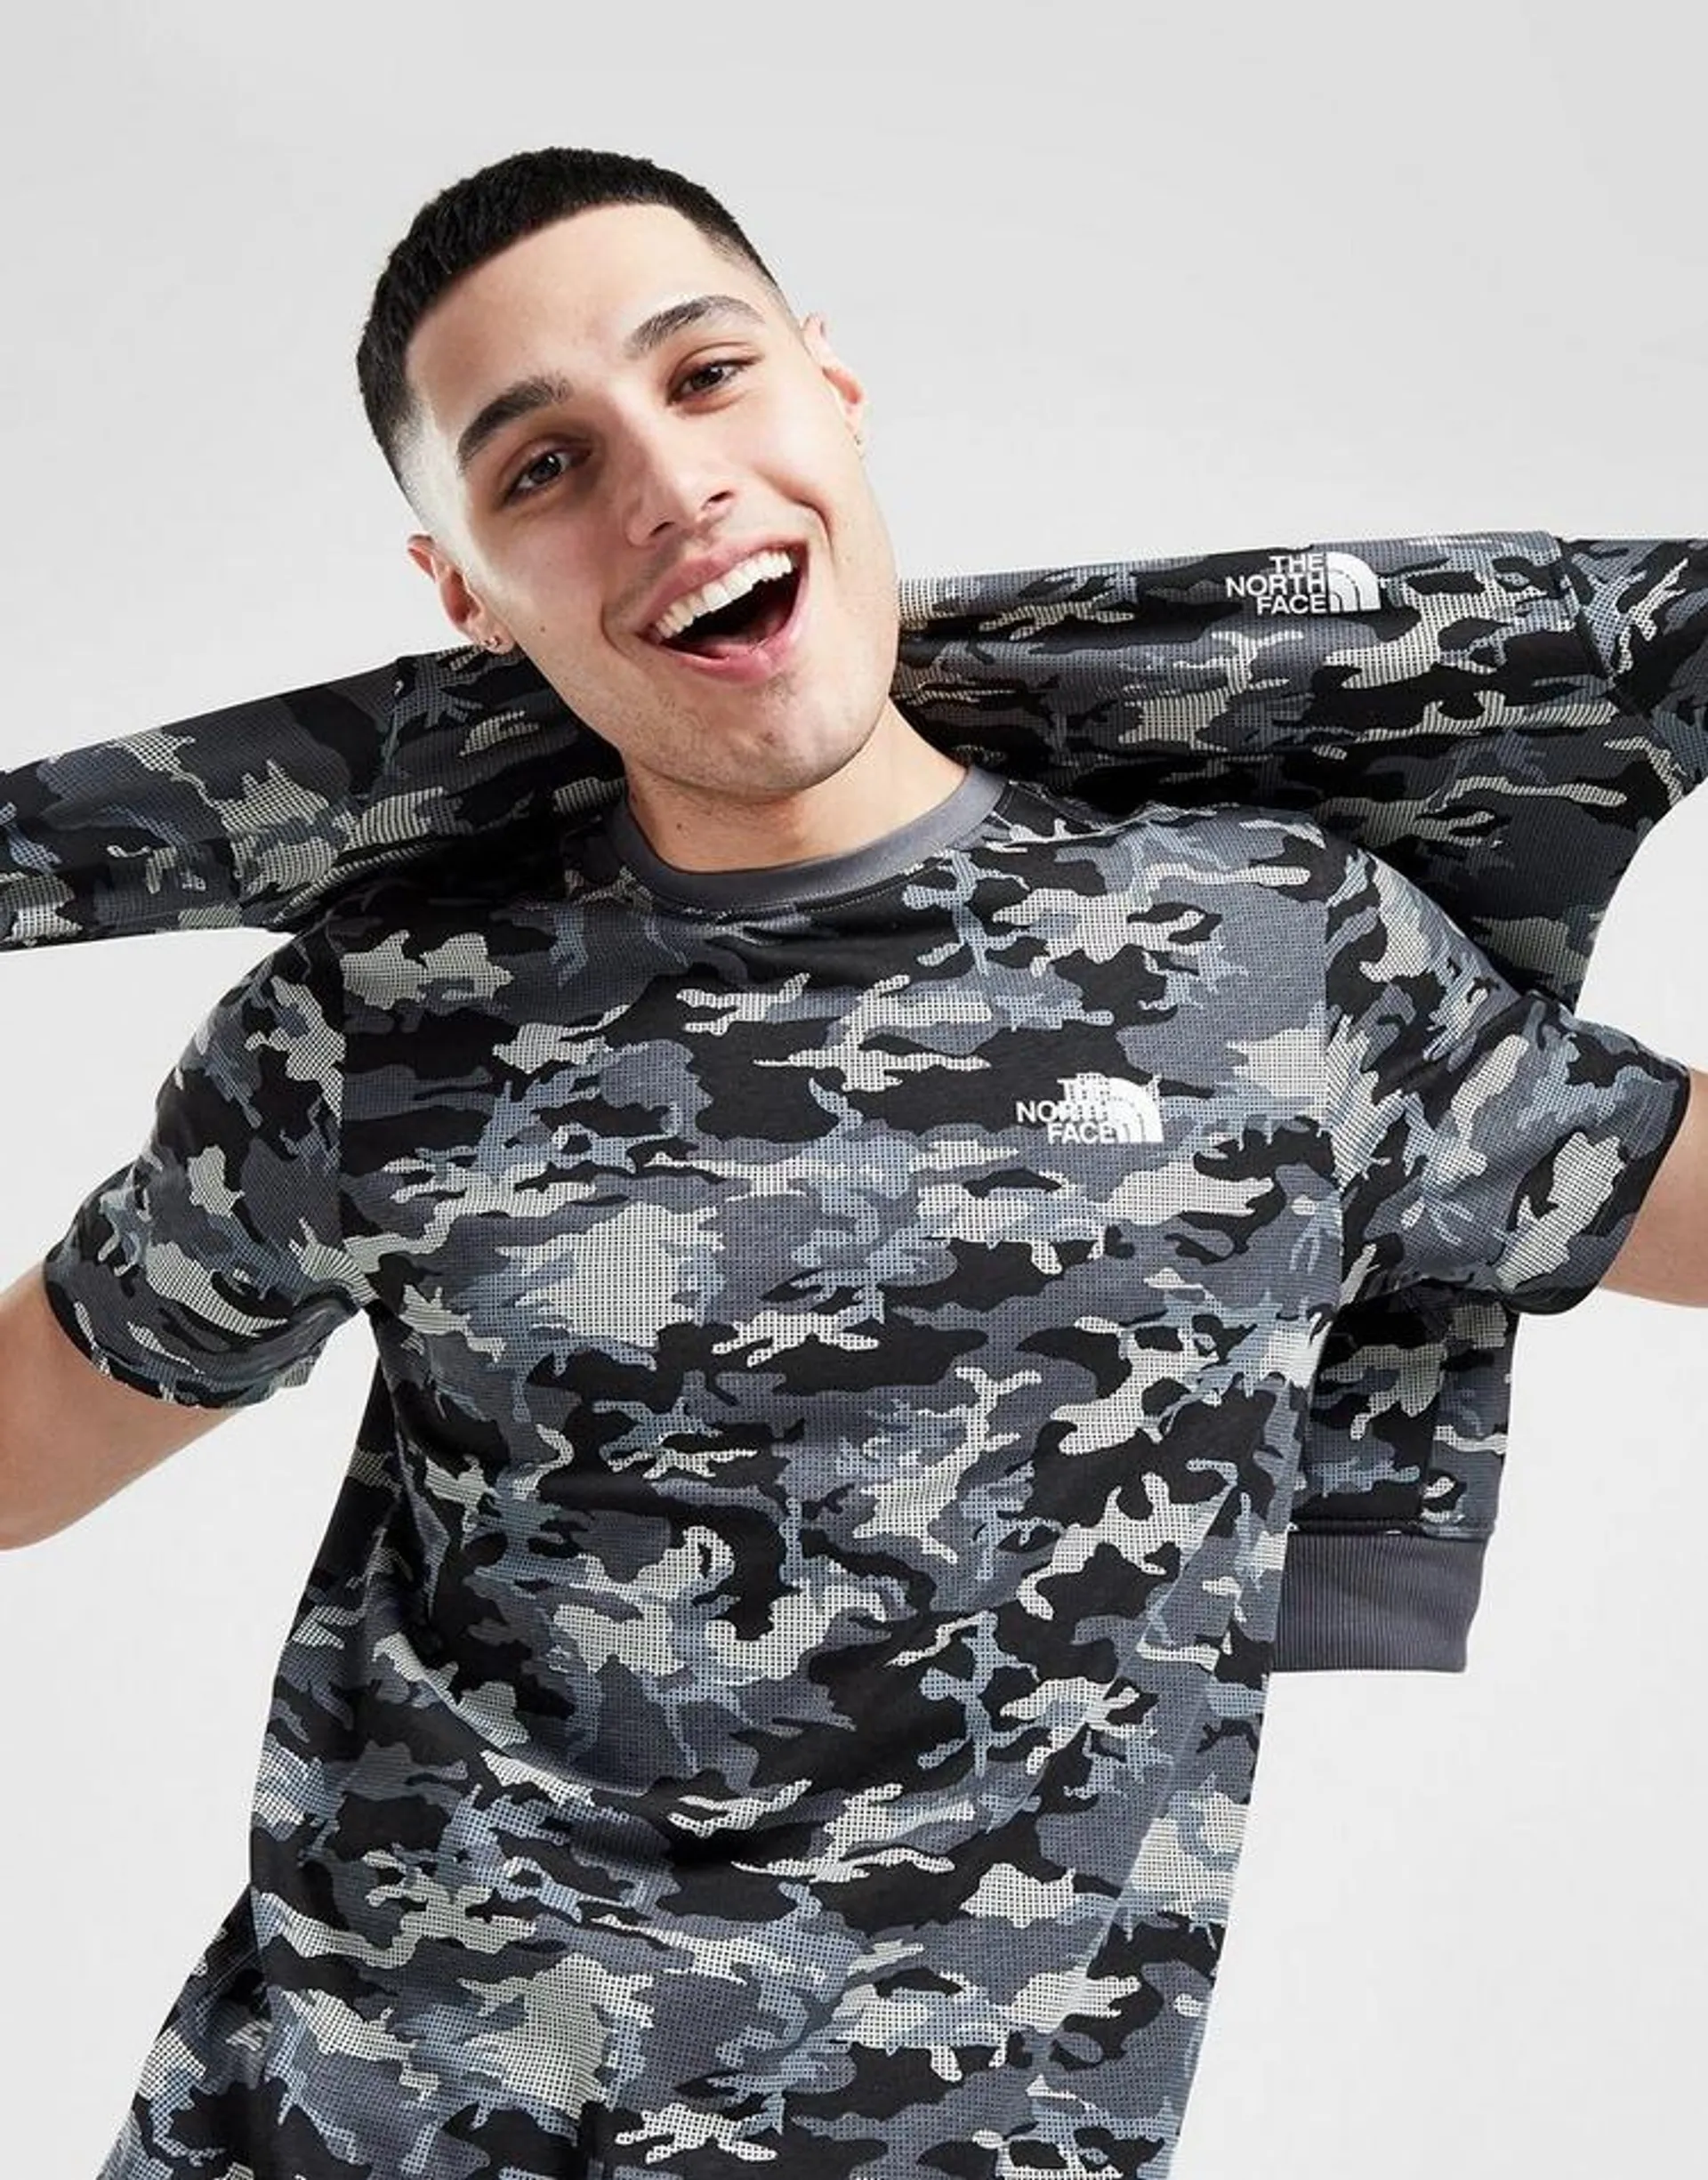 The North Face Camo T-Shirt